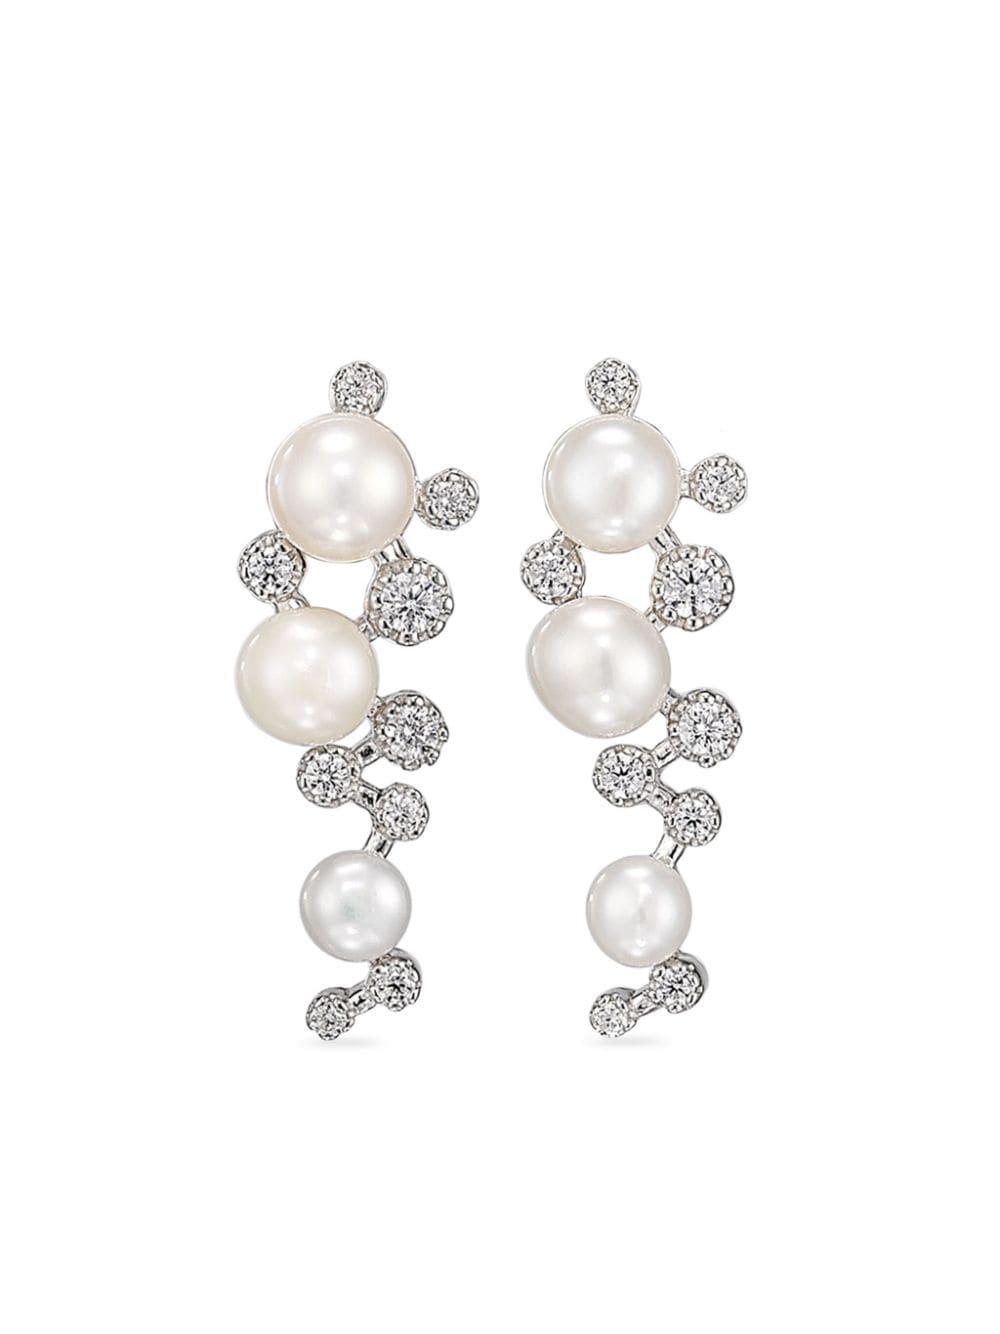 18kt white gold Mini Constellation diamond and freshwater pearl earrings